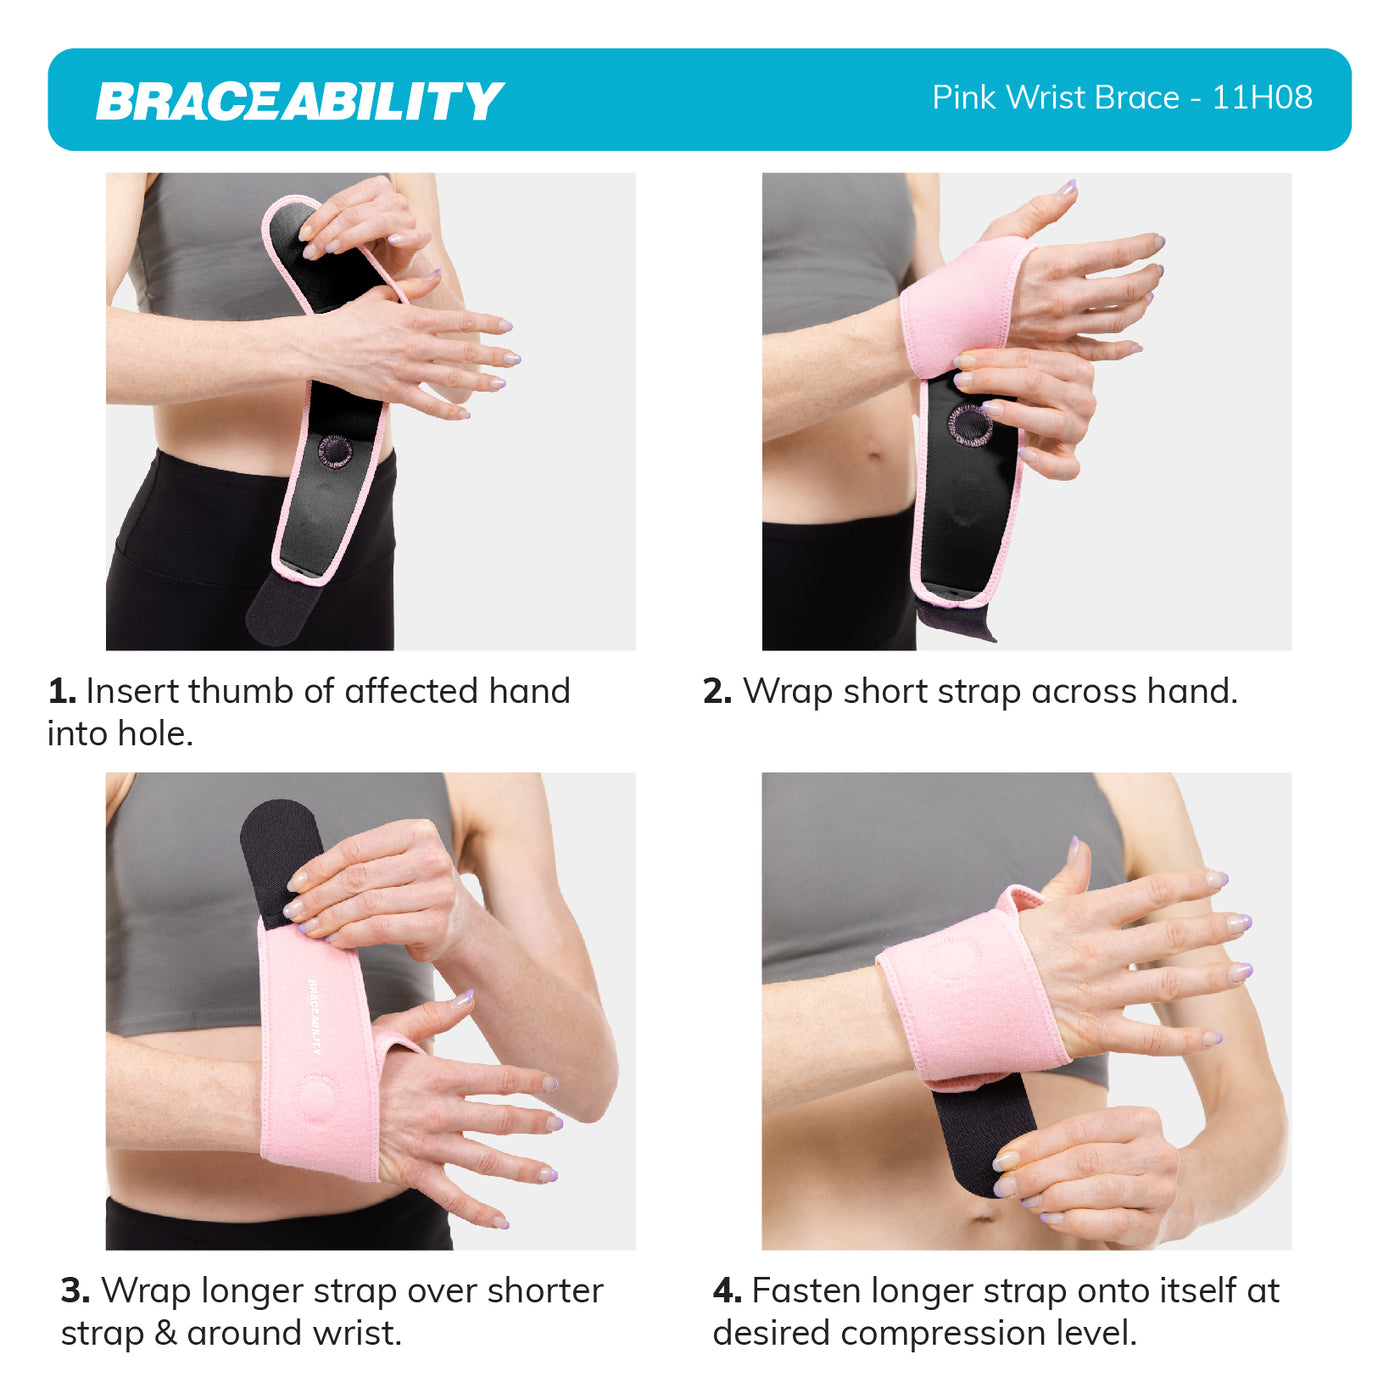 to put on the pink wrist brace, insert thumb through hole, wrap short strap across hand and wrap long strap over top